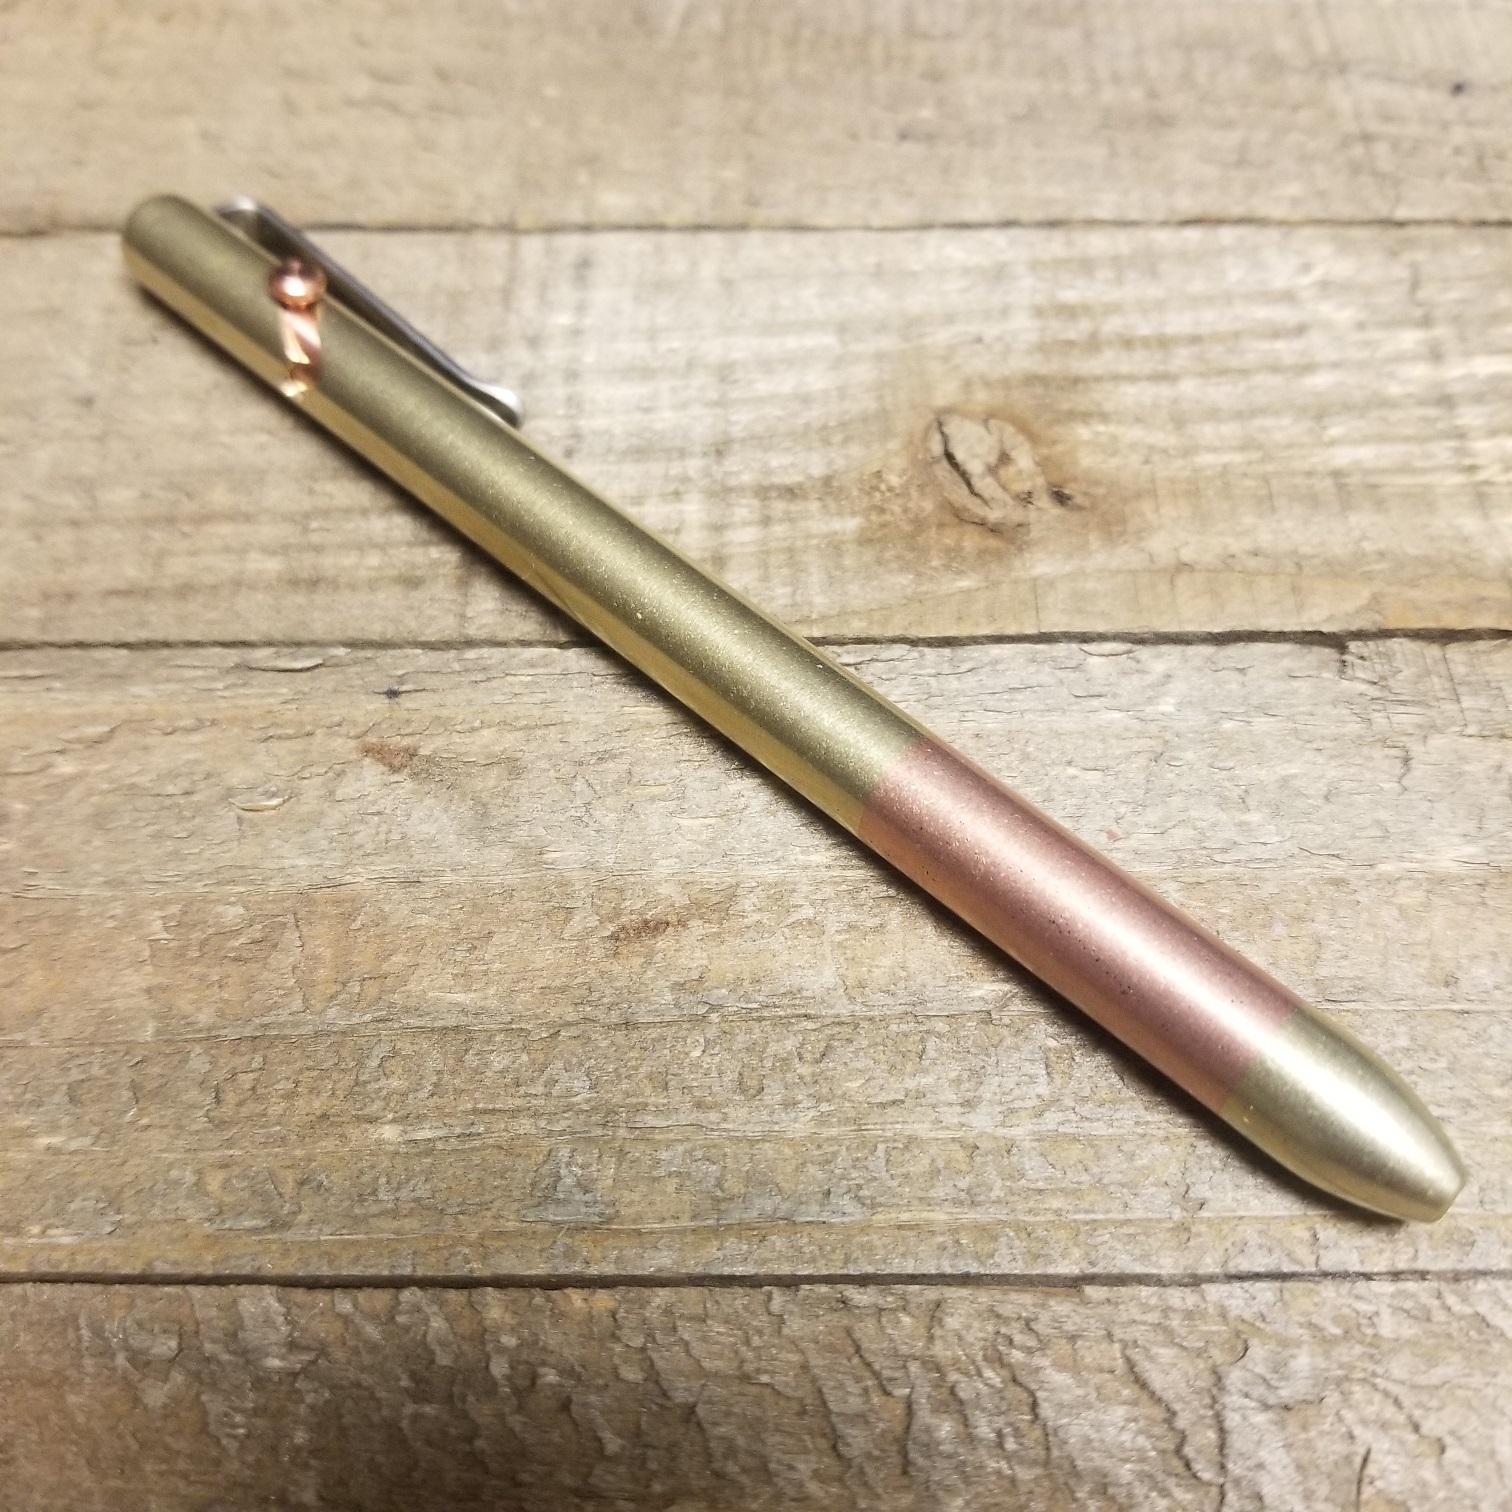 https://honeybadgerarsenal.com/wp-content/uploads/2022/05/Brass-and-Copper-EDC-Pen-with-Clip-1.jpg